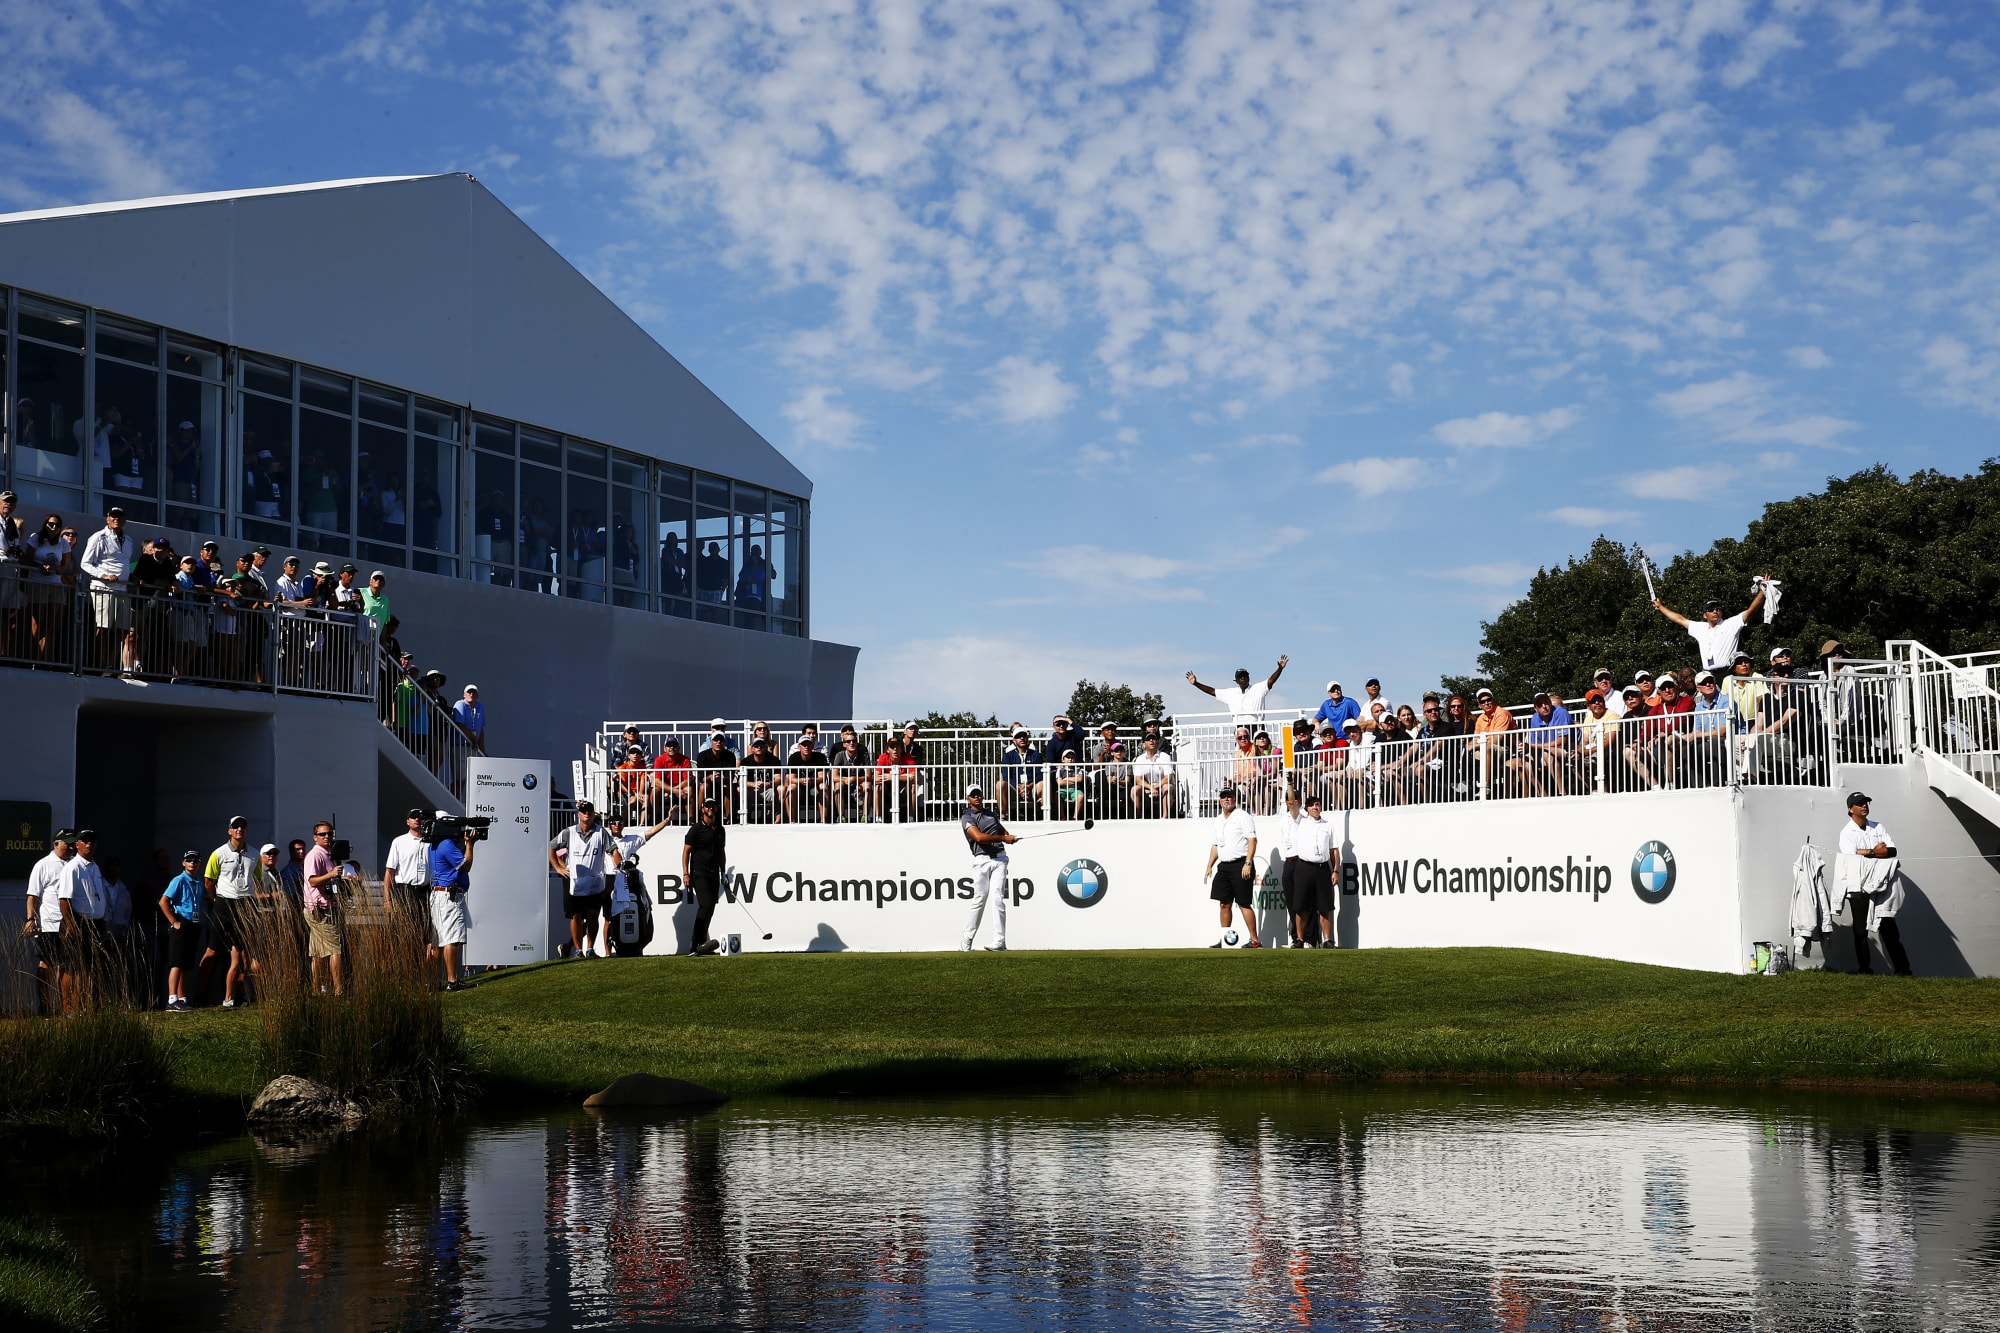 BMW Championship Power Rankings Top ten at Conway Farms